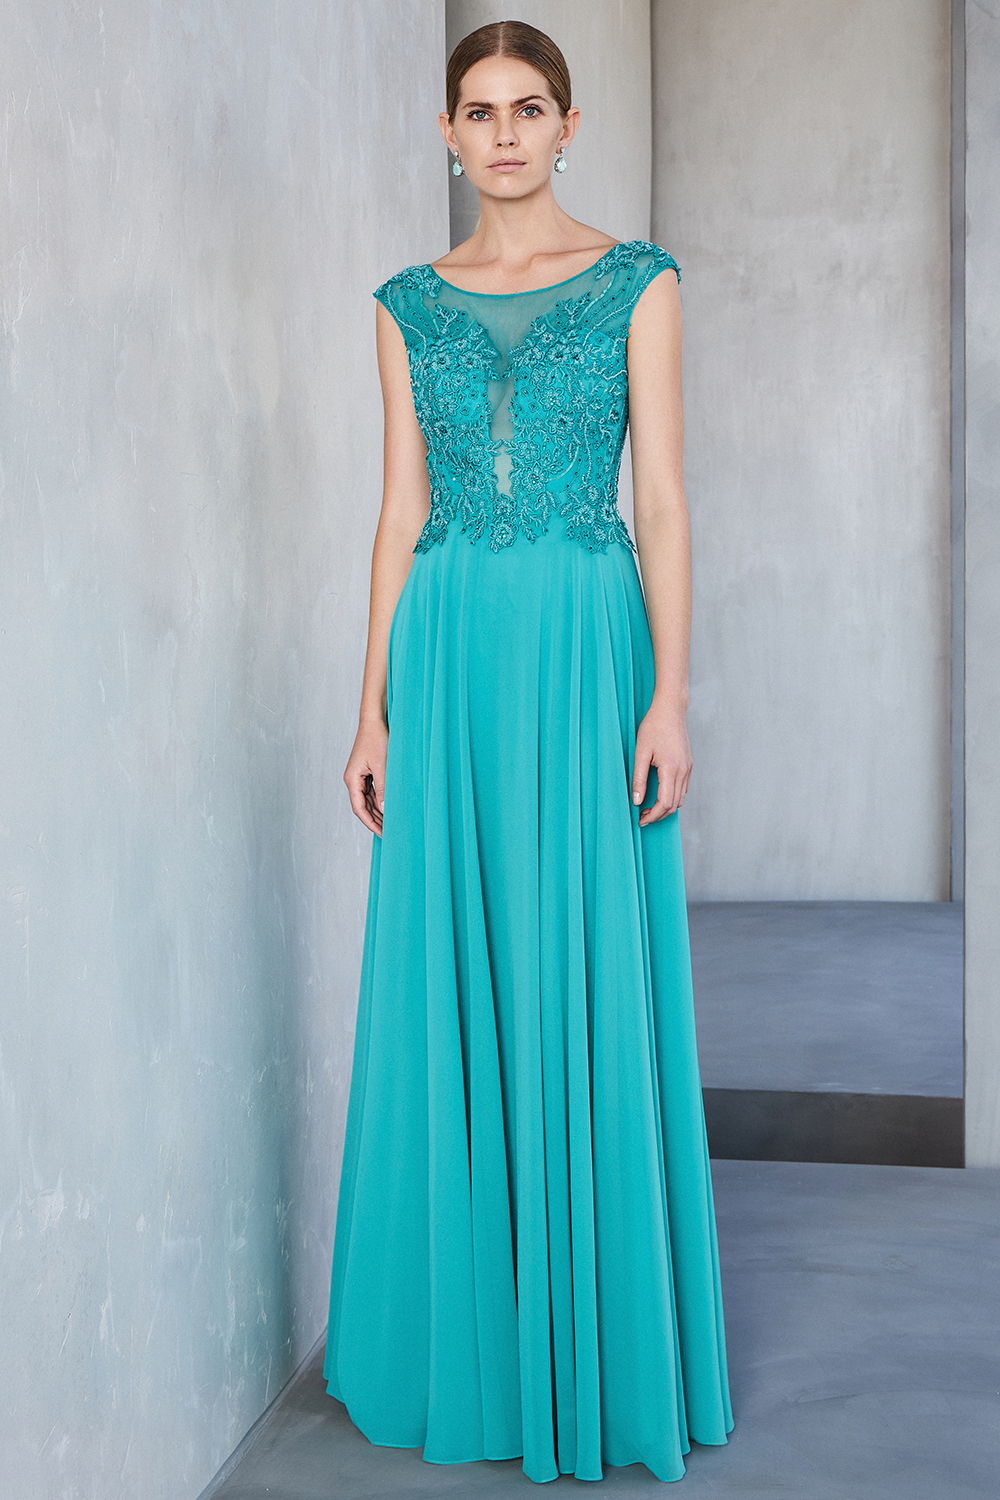 Classic Dresses / Long evening dress with chiffon and beaded top